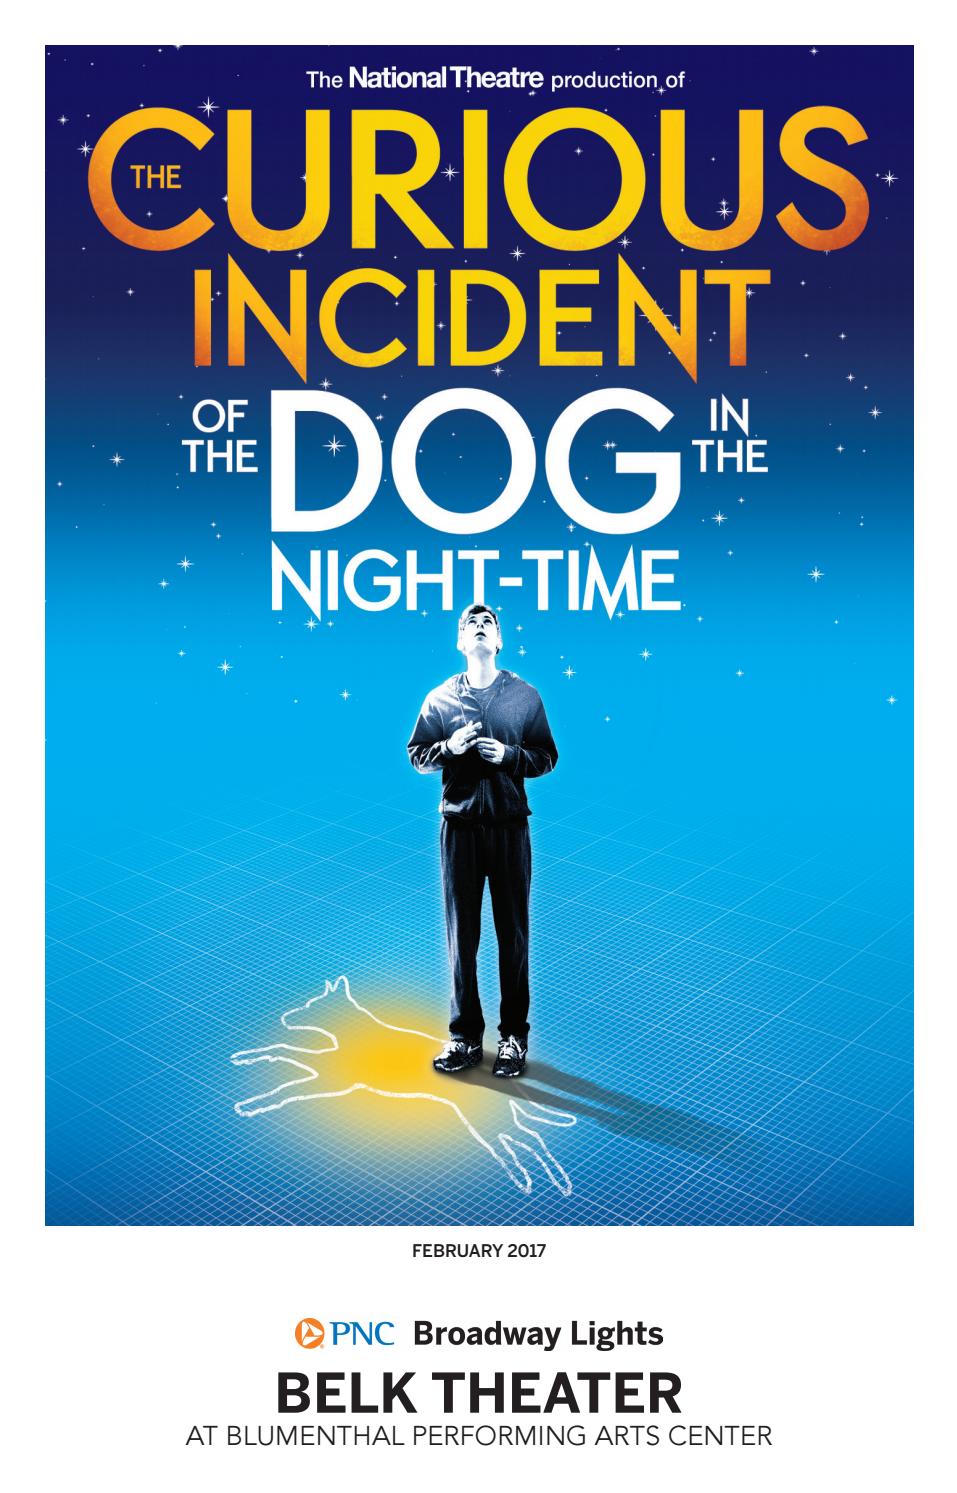 1617 The Curious Incident Online Playbill by Blumenthal Performing Arts -  issuu